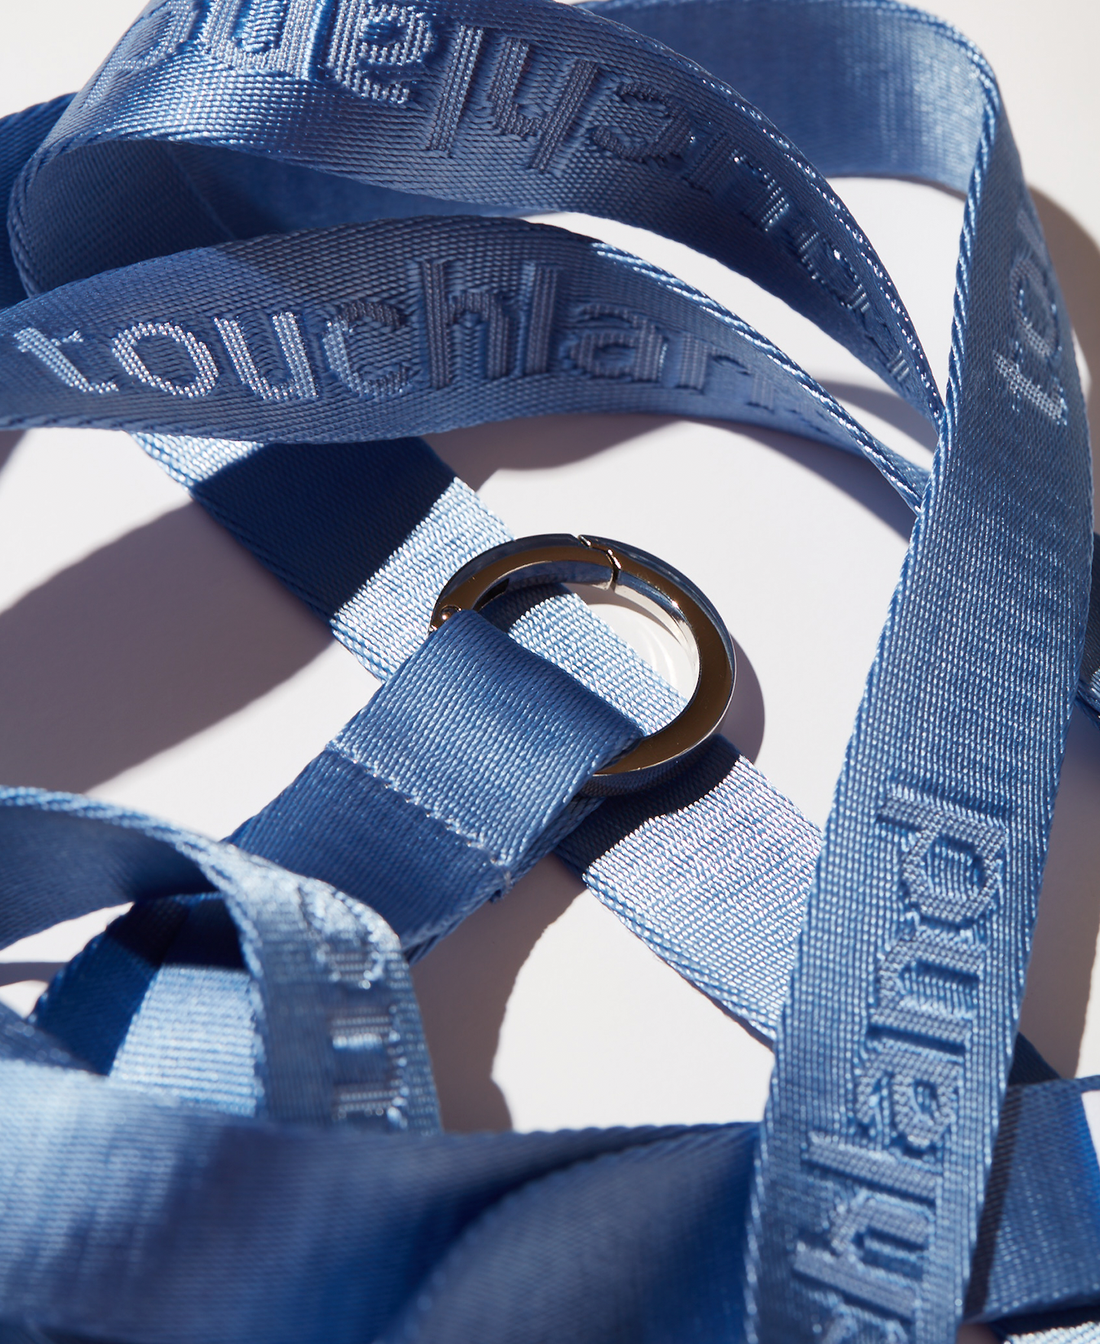 Blue lanyards tangled and zoomed in on white background